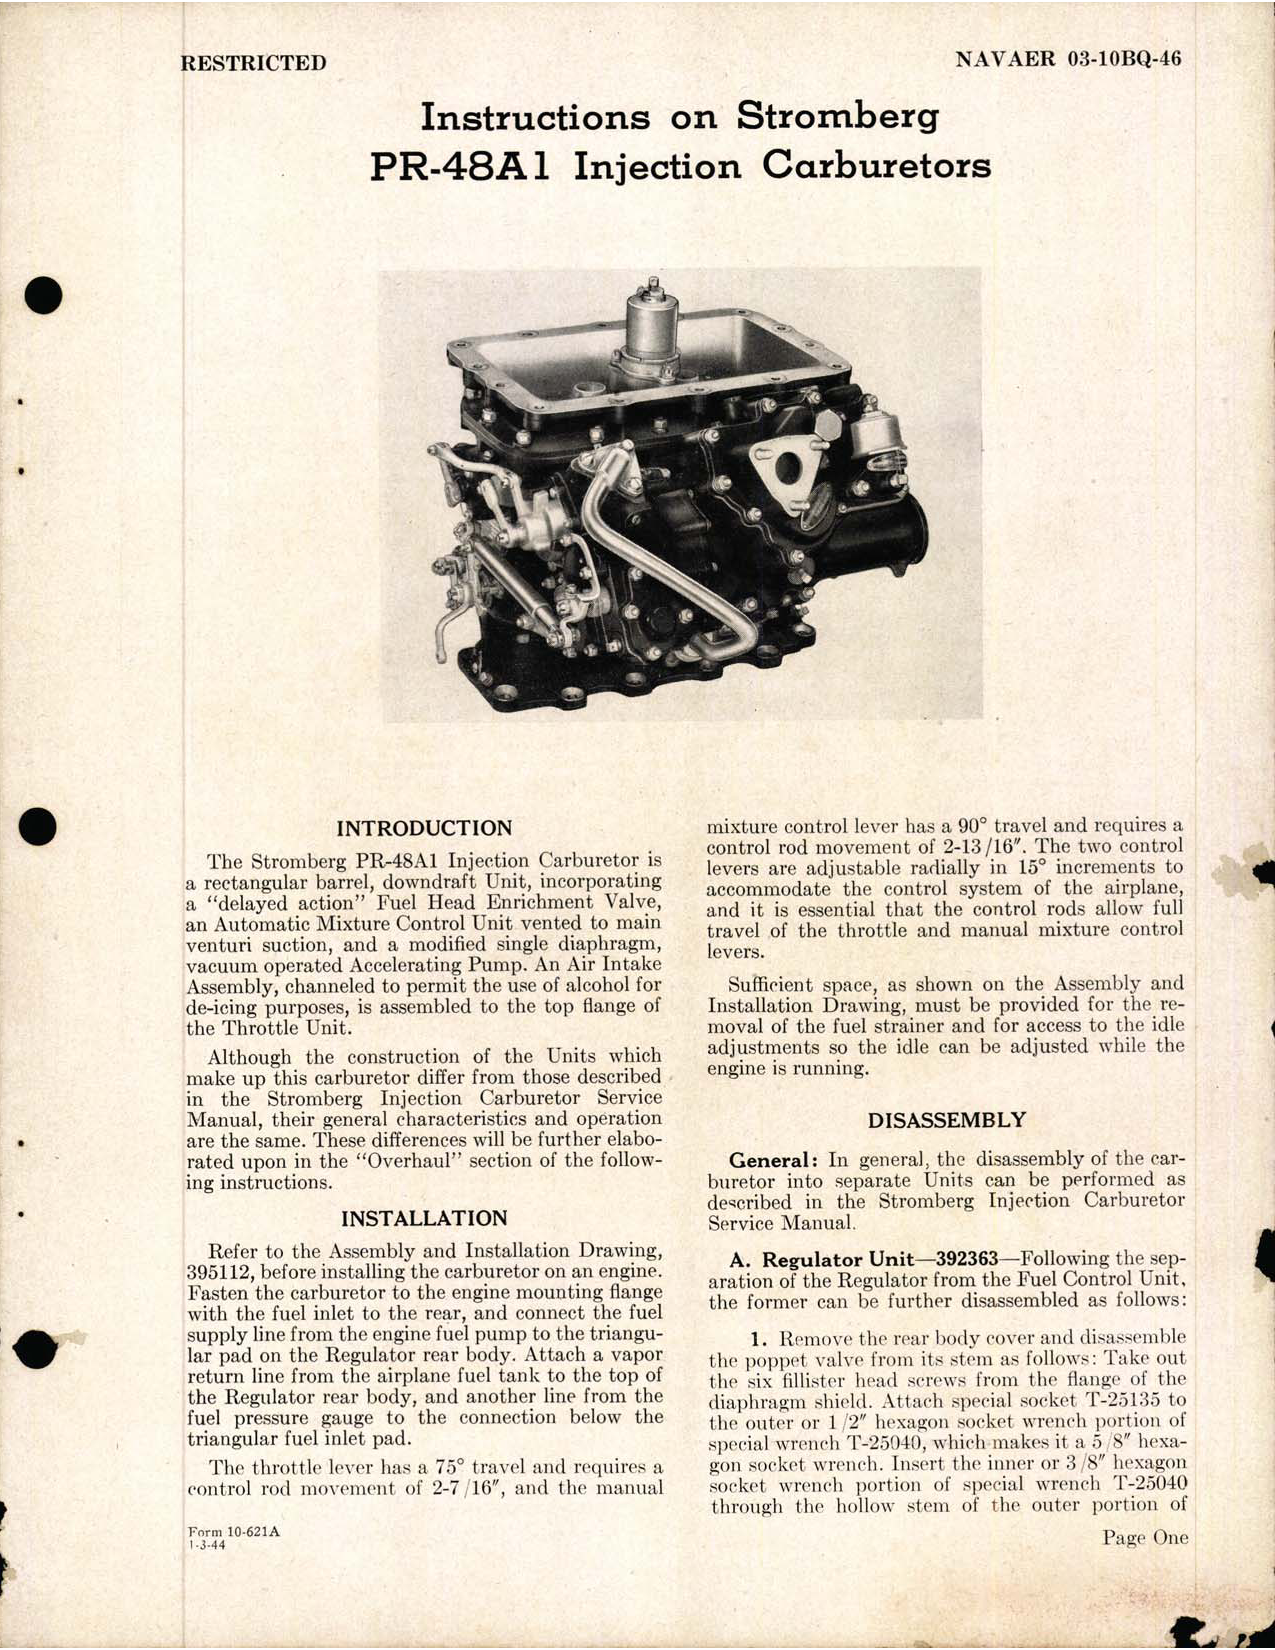 Sample page  3 from AirCorps Library document: PR-48A1 Injection Carburetors Instructions - 03-10BQ-46